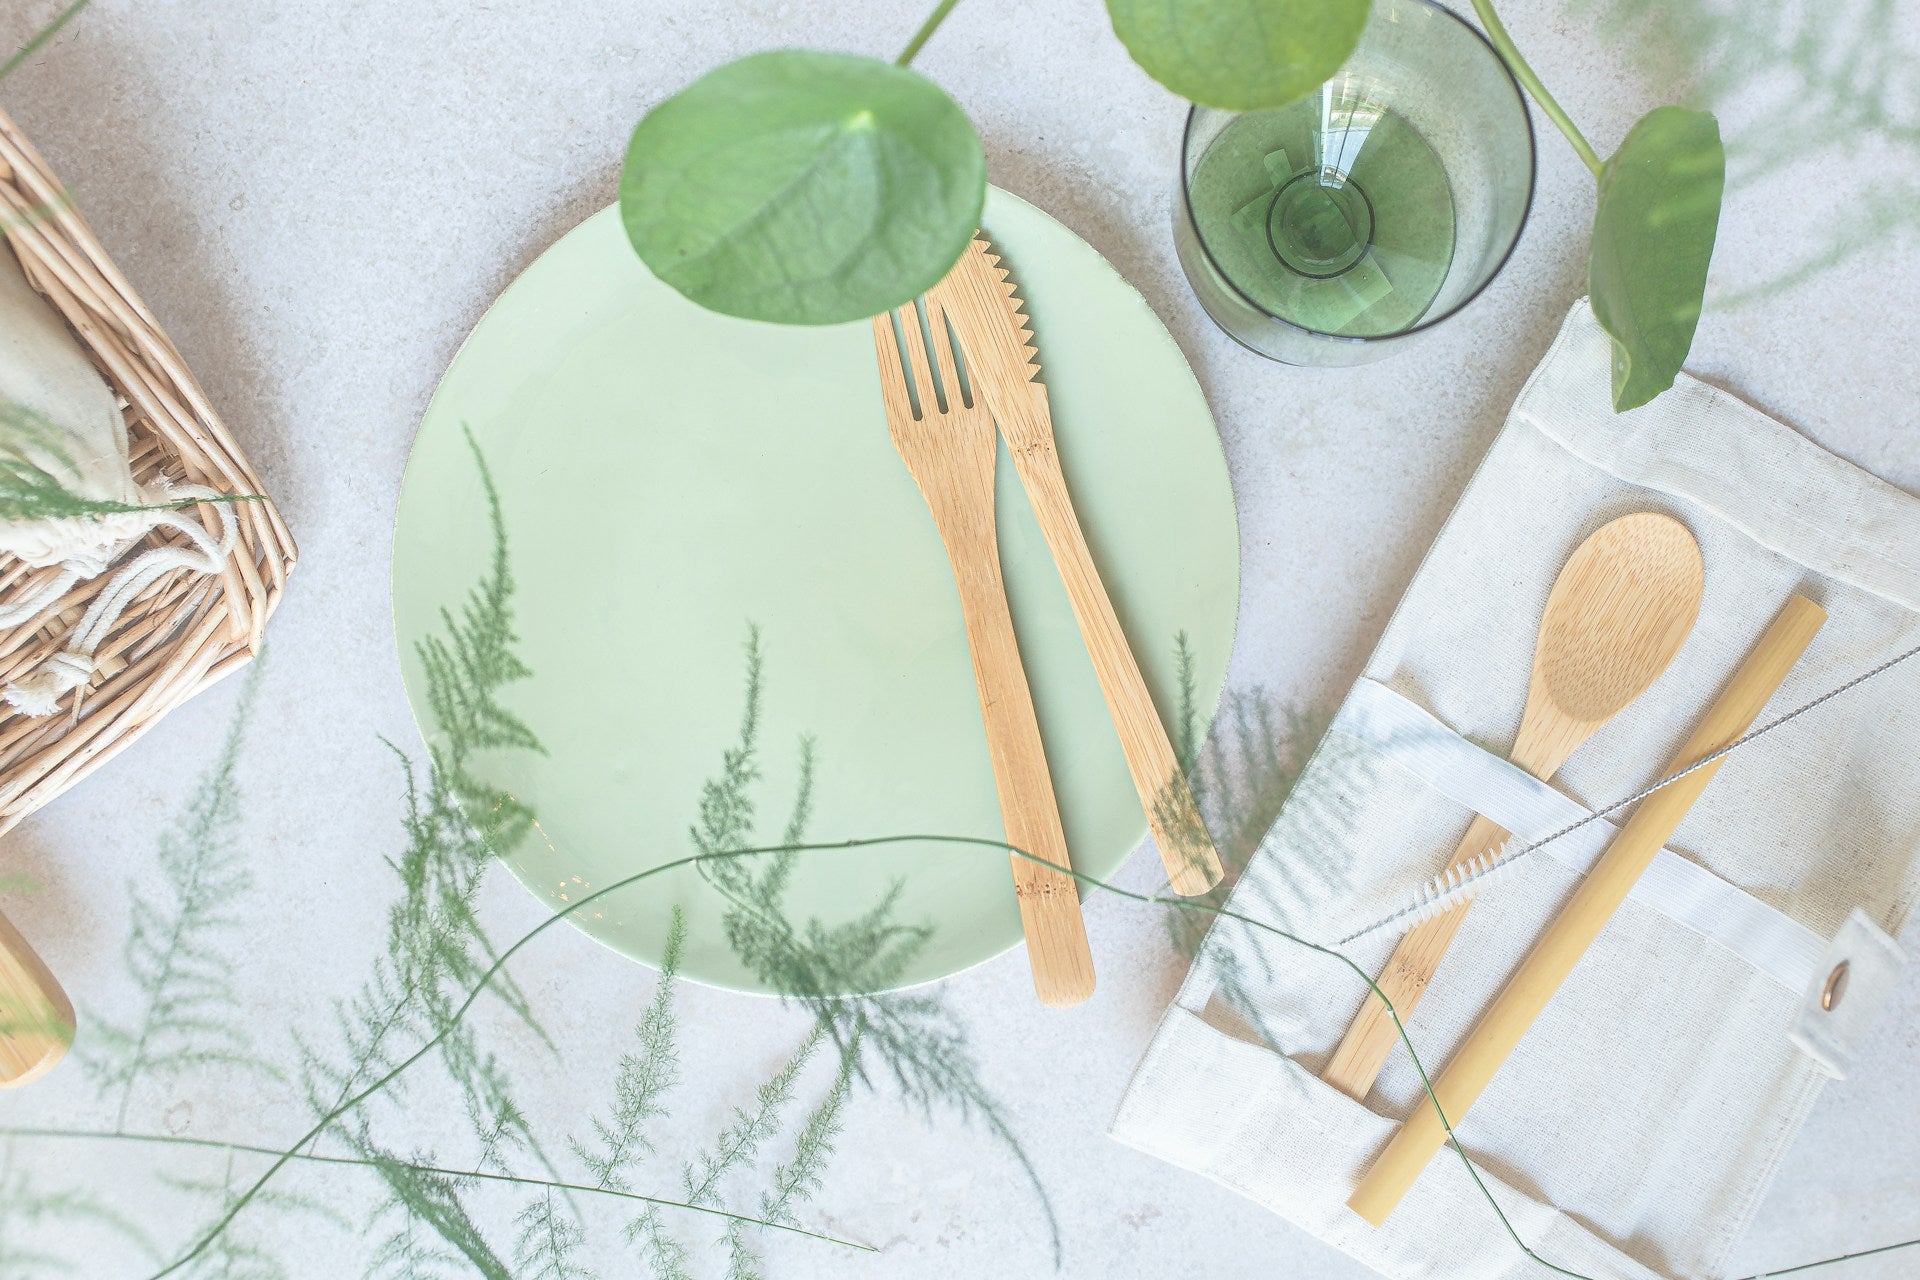 A flatlay image of zero waste goods including bamboo cutlery set, cotton bags, and more; green theme